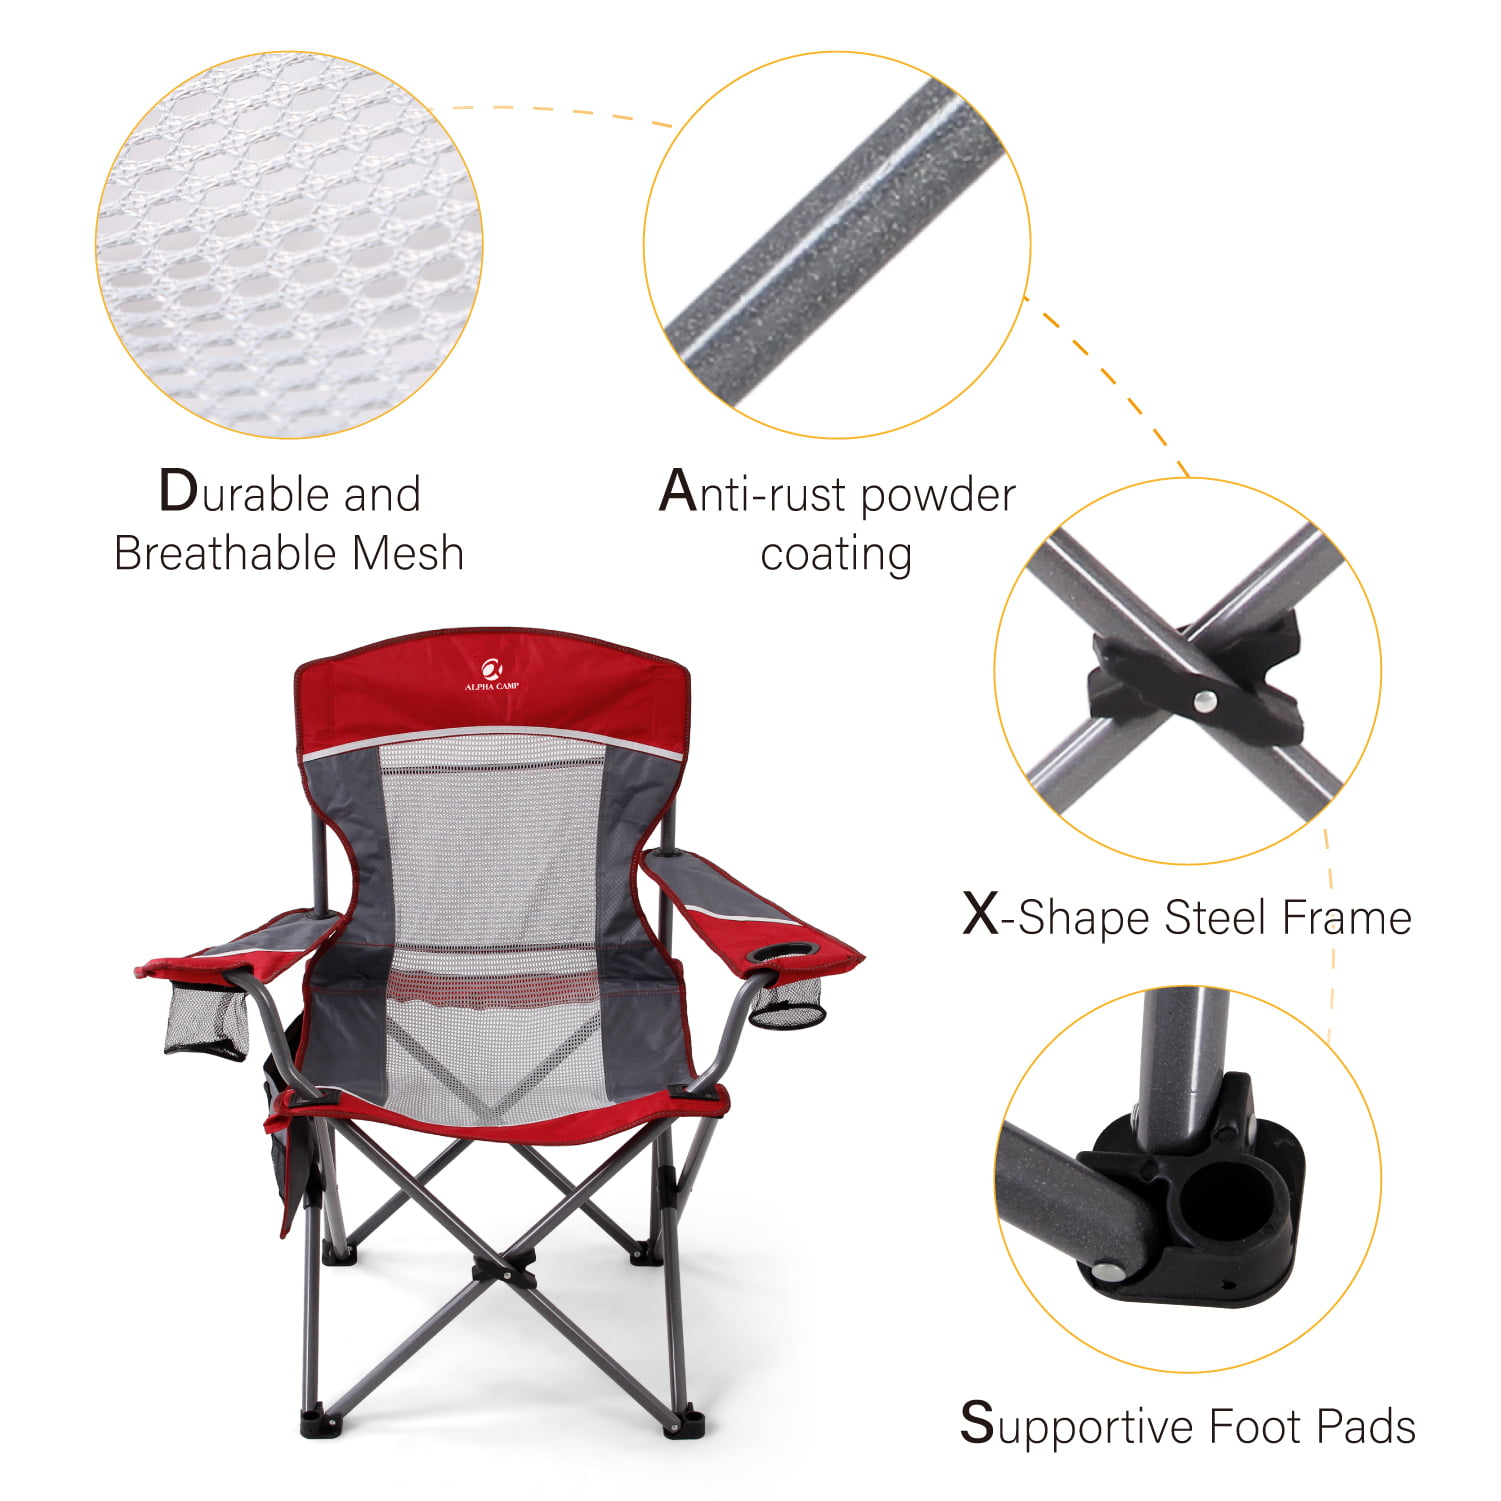 Alpha Camper Oversized Camping Chair Portable Folding Chair Heavy-Duty Steel Frame Mesh Chair with Cup Holder Suitable for Outdoor Fishing Camping, Black